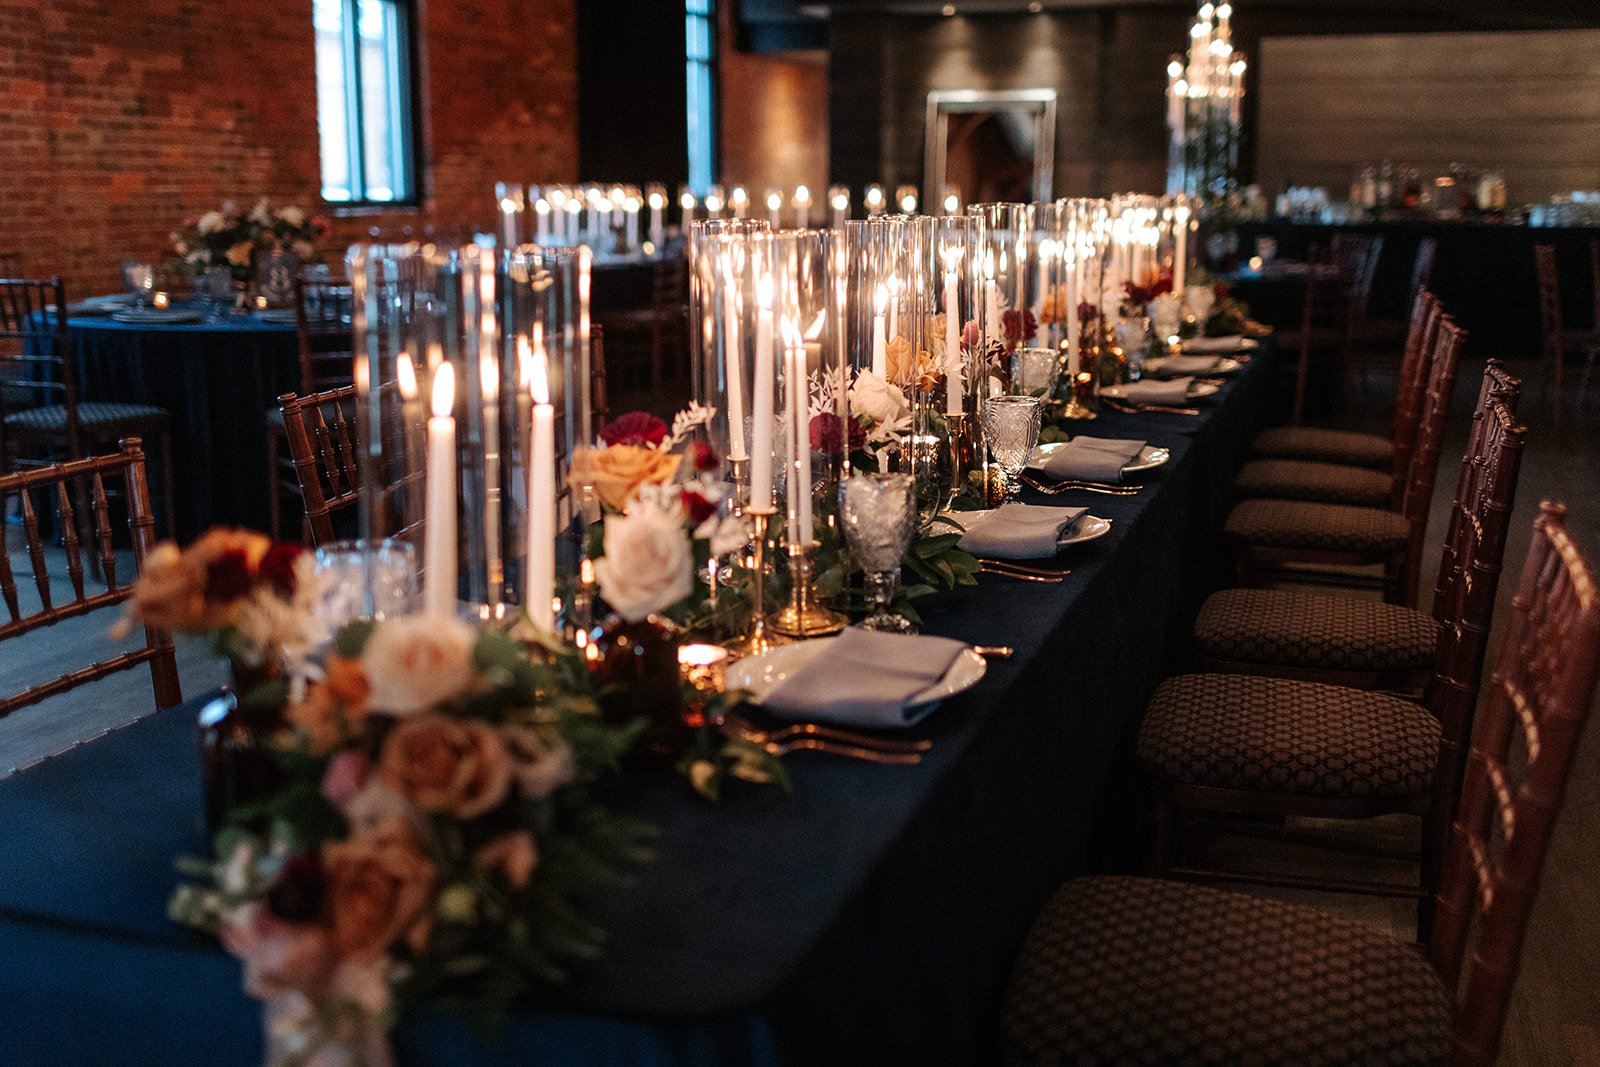  An industrial wedding venue in Columbus, Ohio, is filled with long tables decorated with small floral centerpieces and tall white candlesticks placed in glass hurricanes, all lit for the wedding reception dinner. 